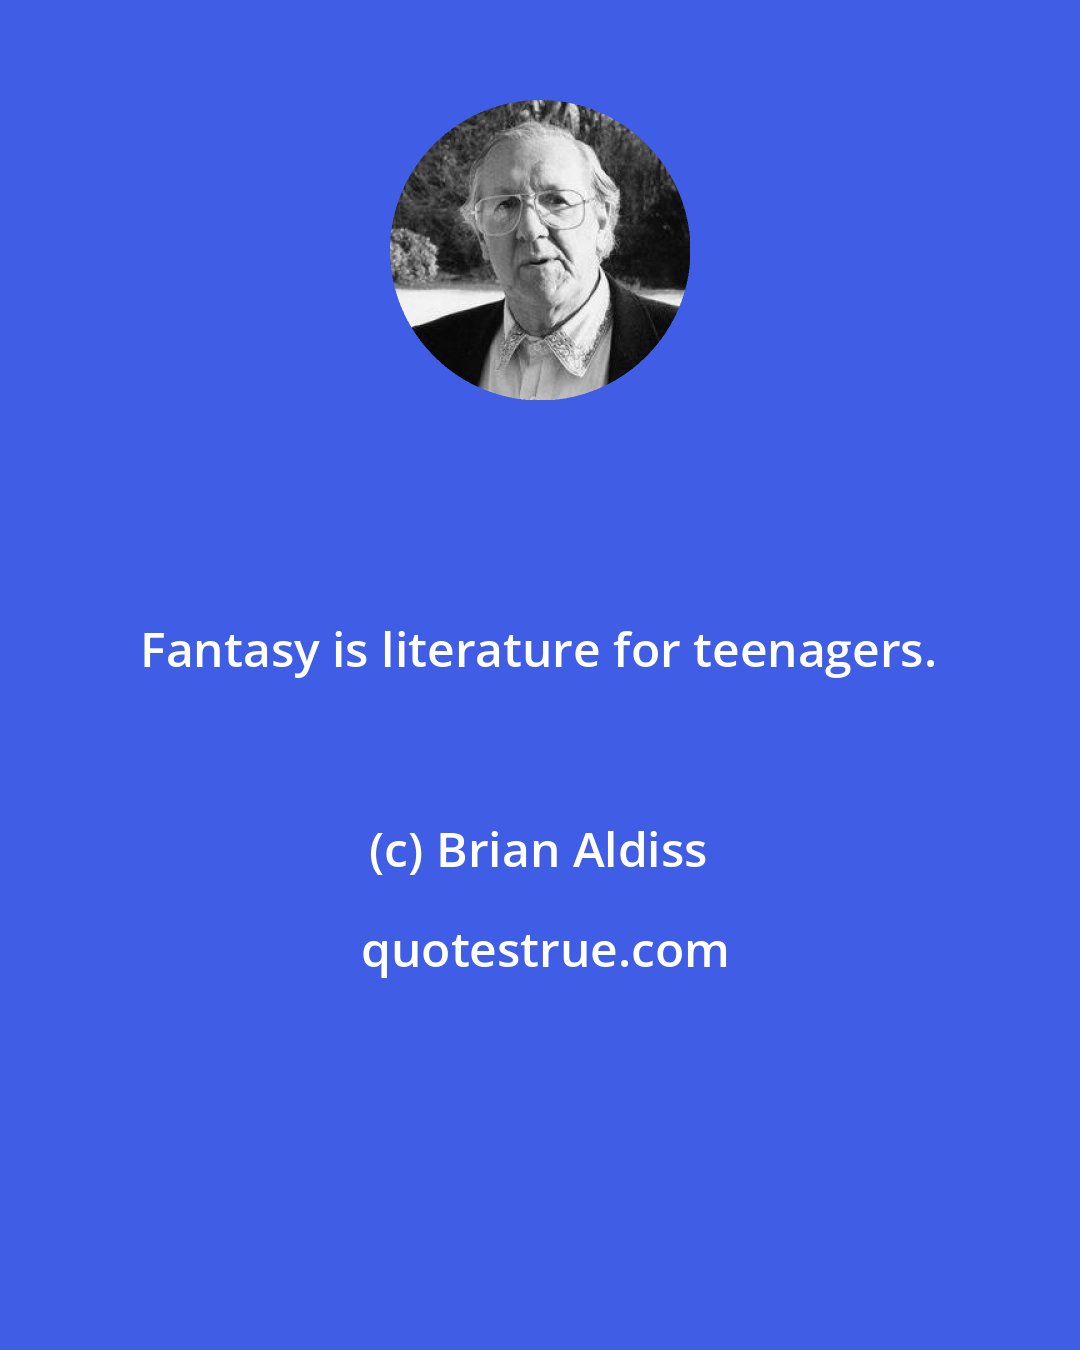 Brian Aldiss: Fantasy is literature for teenagers.